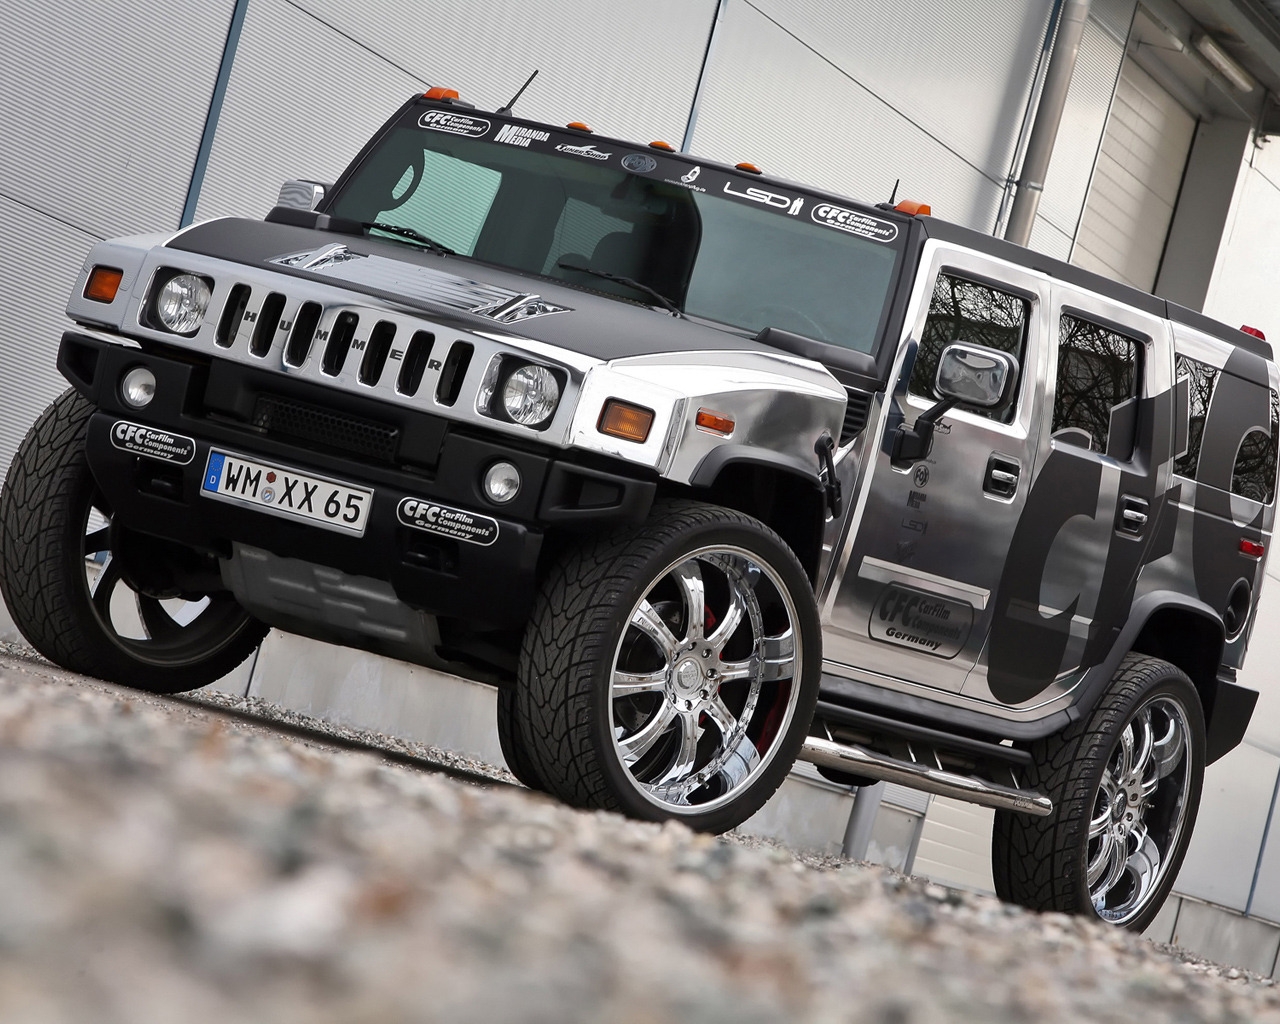 Hummer H2 CFC for 1280 x 1024 resolution